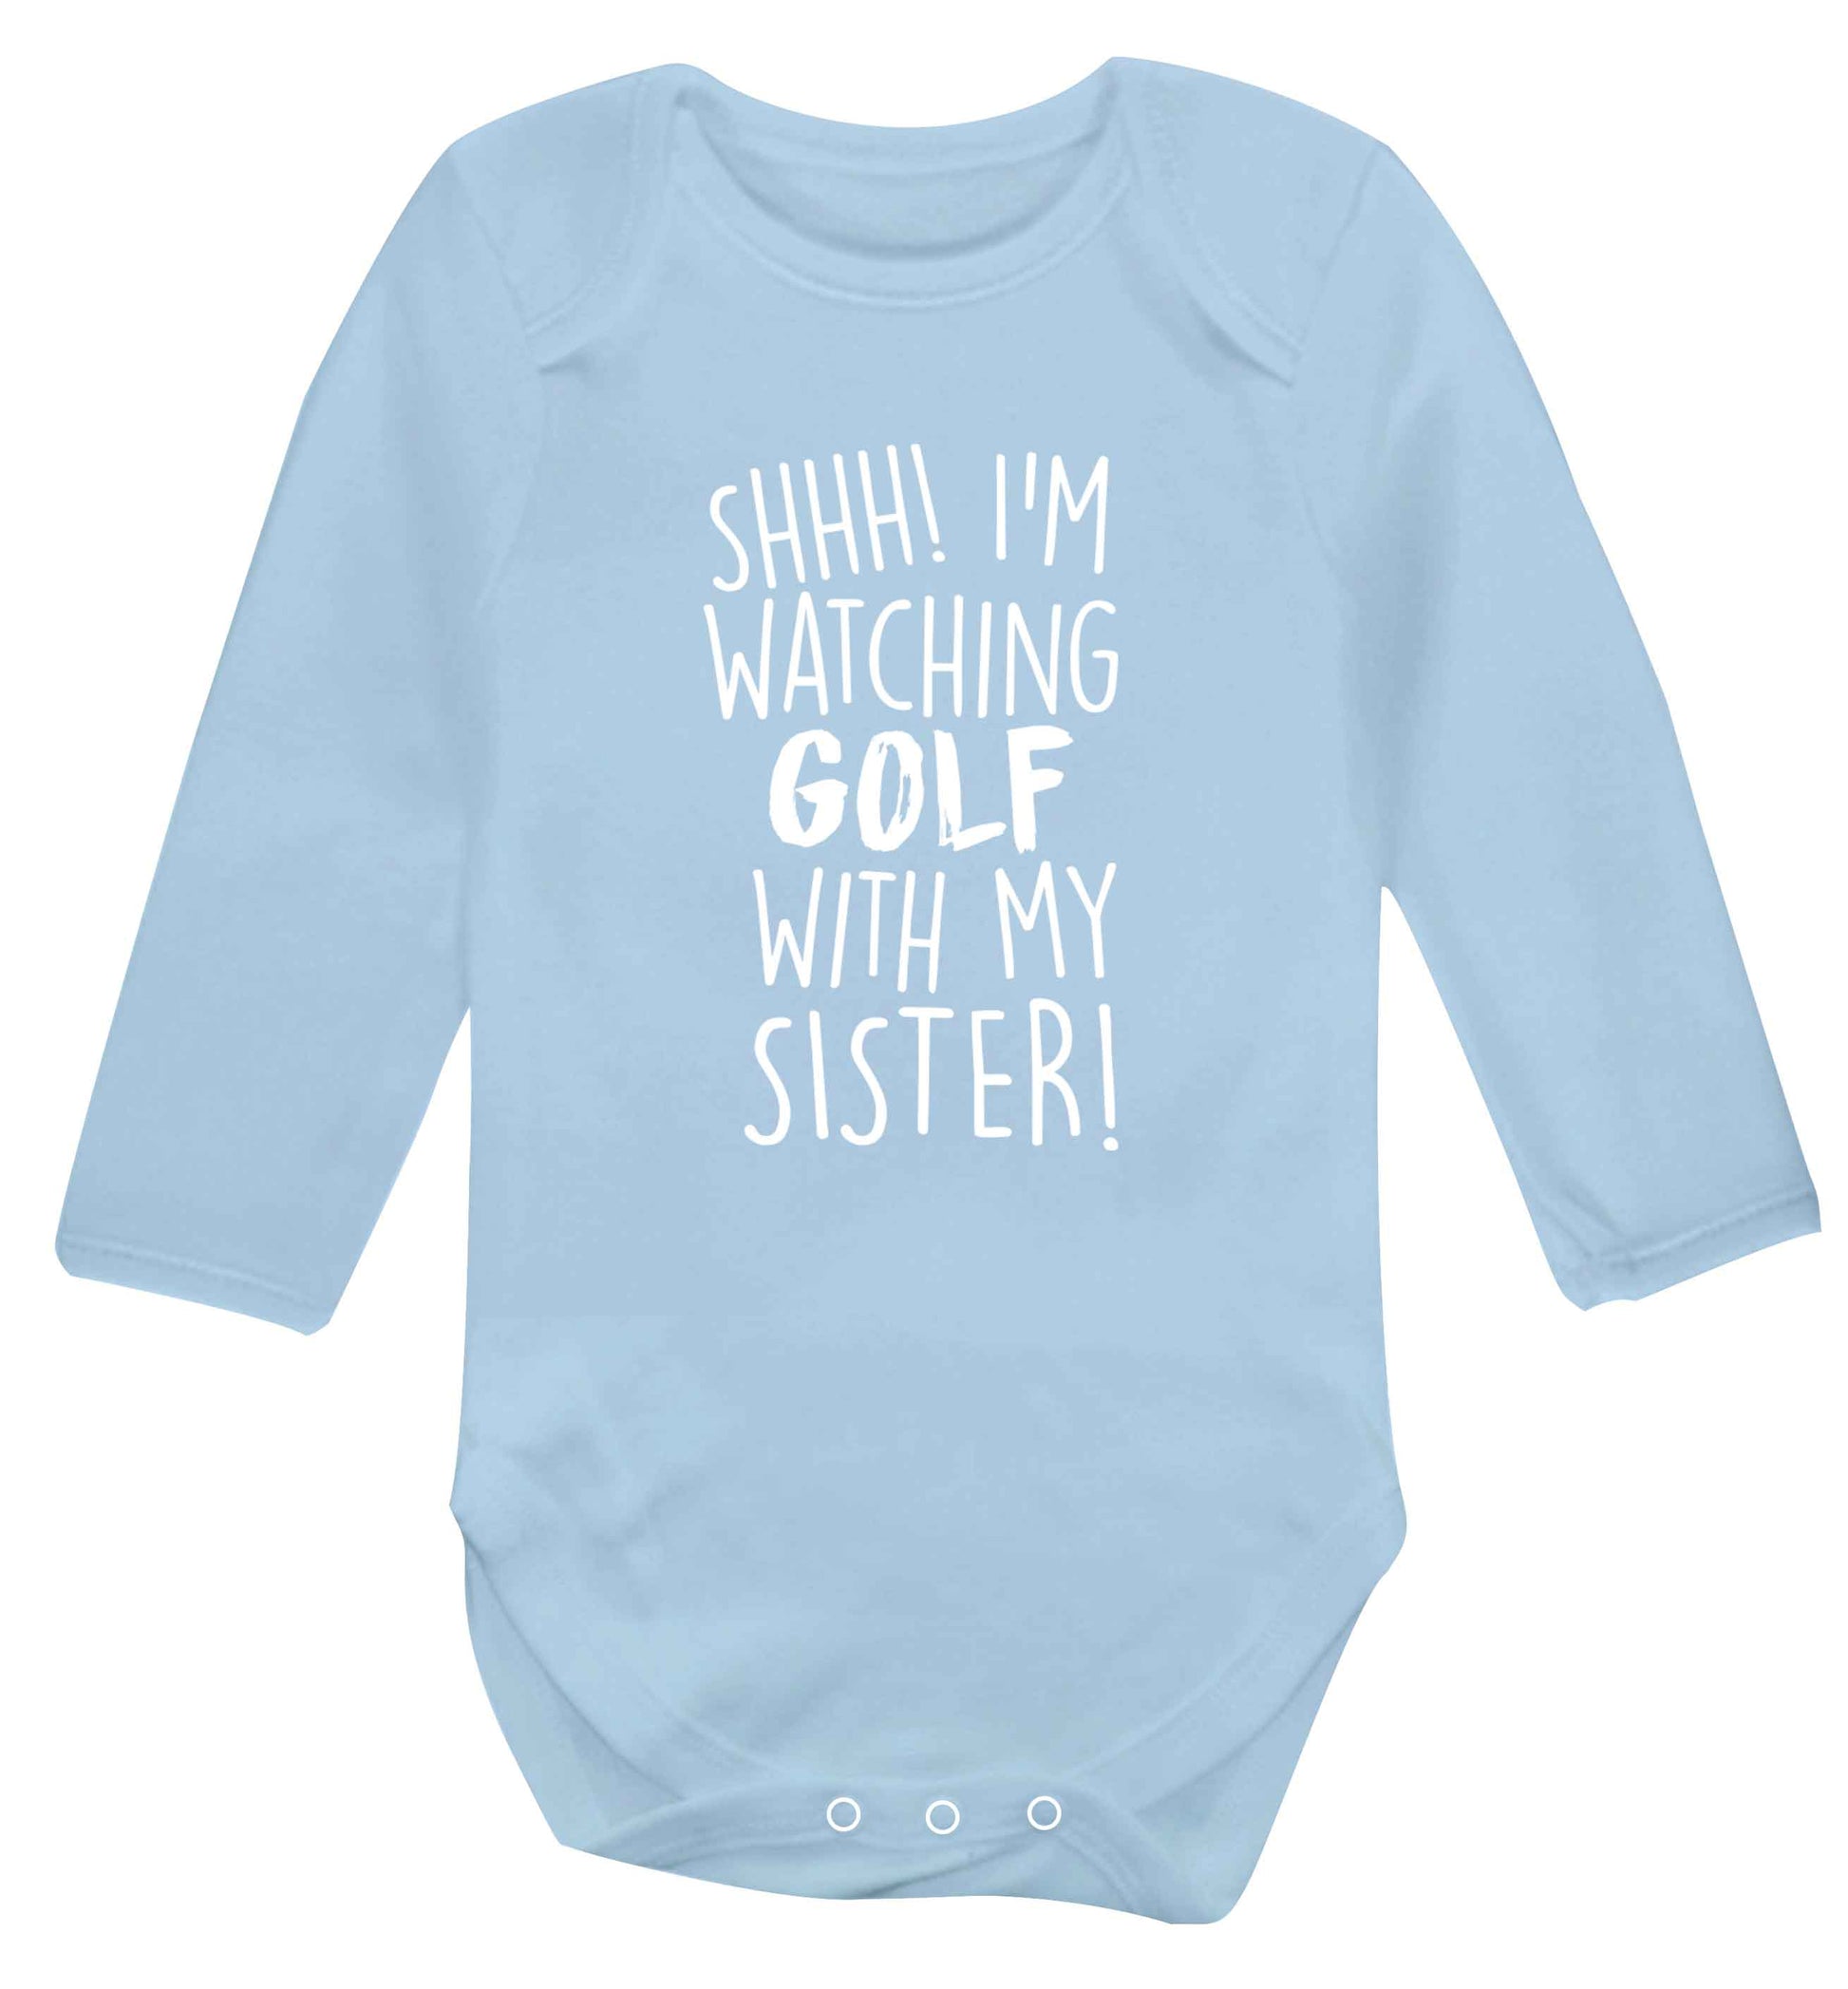 Shh I'm watching golf with my sister Baby Vest long sleeved pale blue 6-12 months